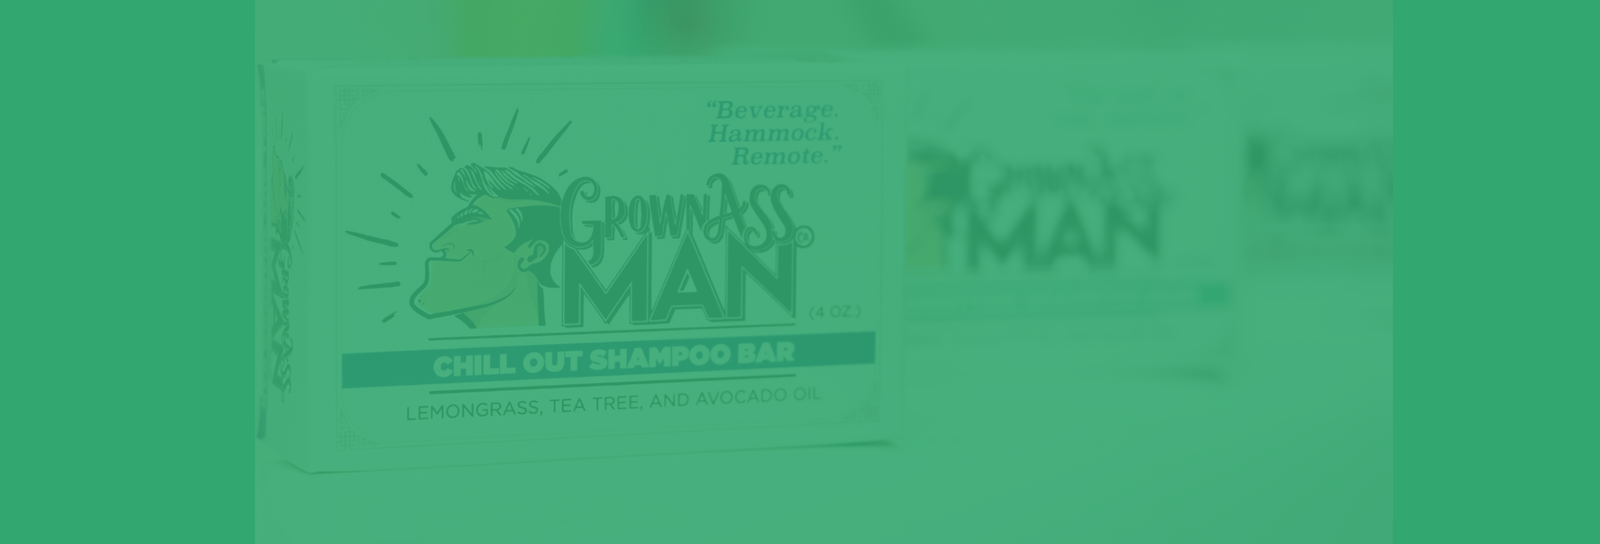 “What is a SHAMPOO BAR, anyway?”